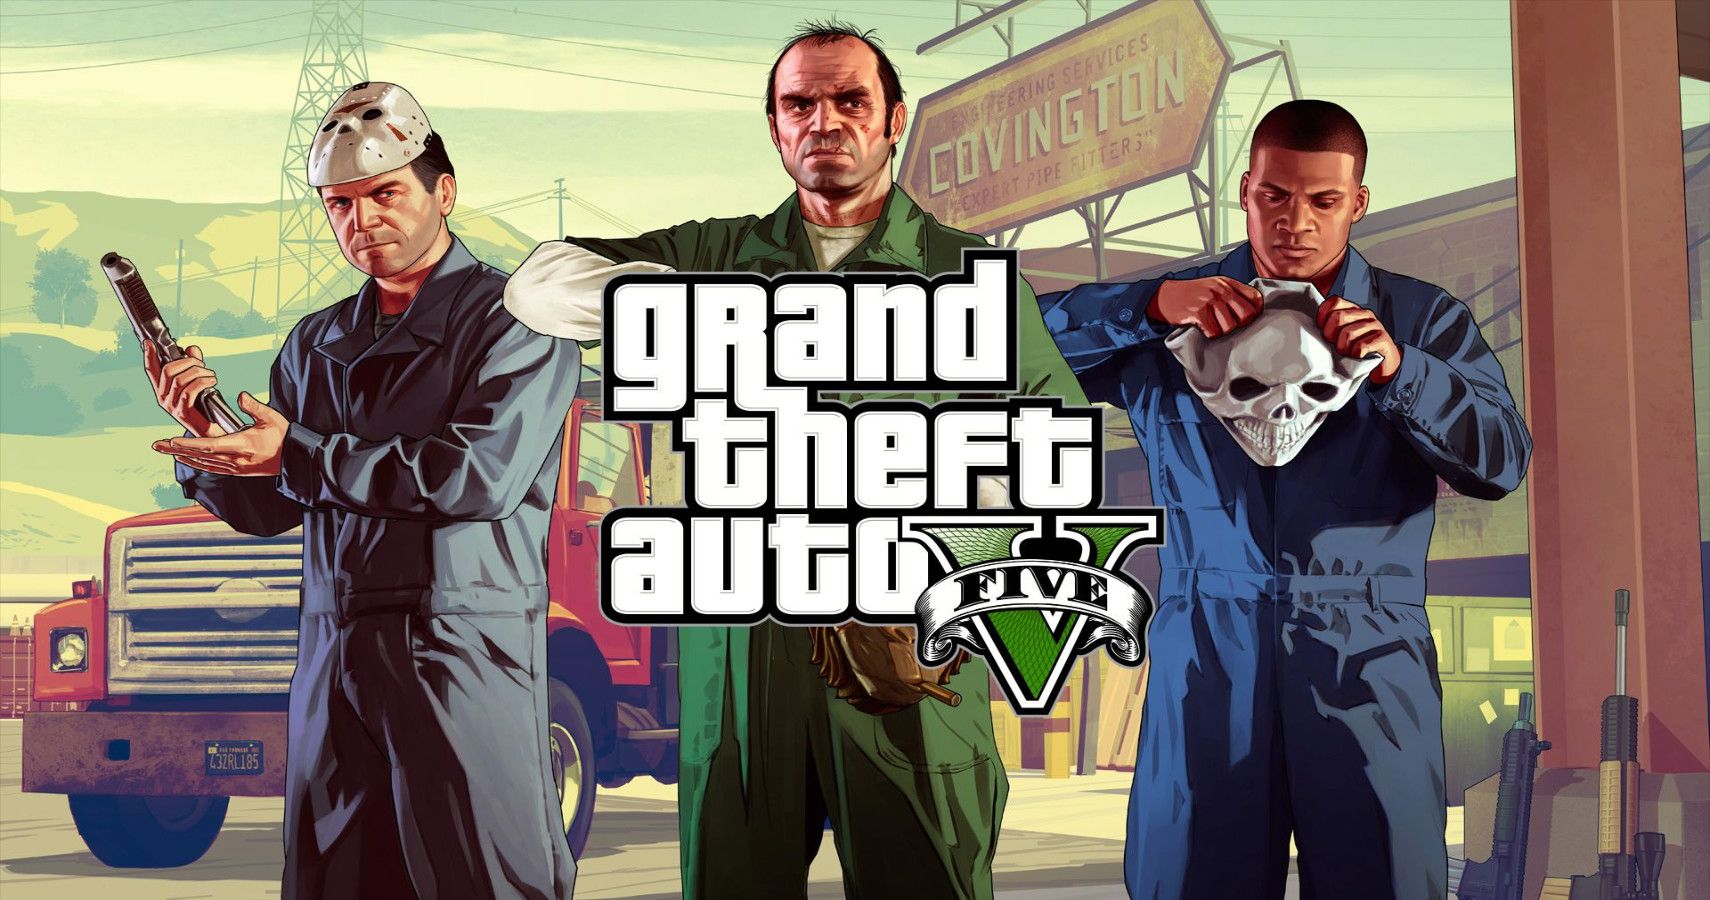 GTA 5 Was Marchs Most Viewed Game On Twitch